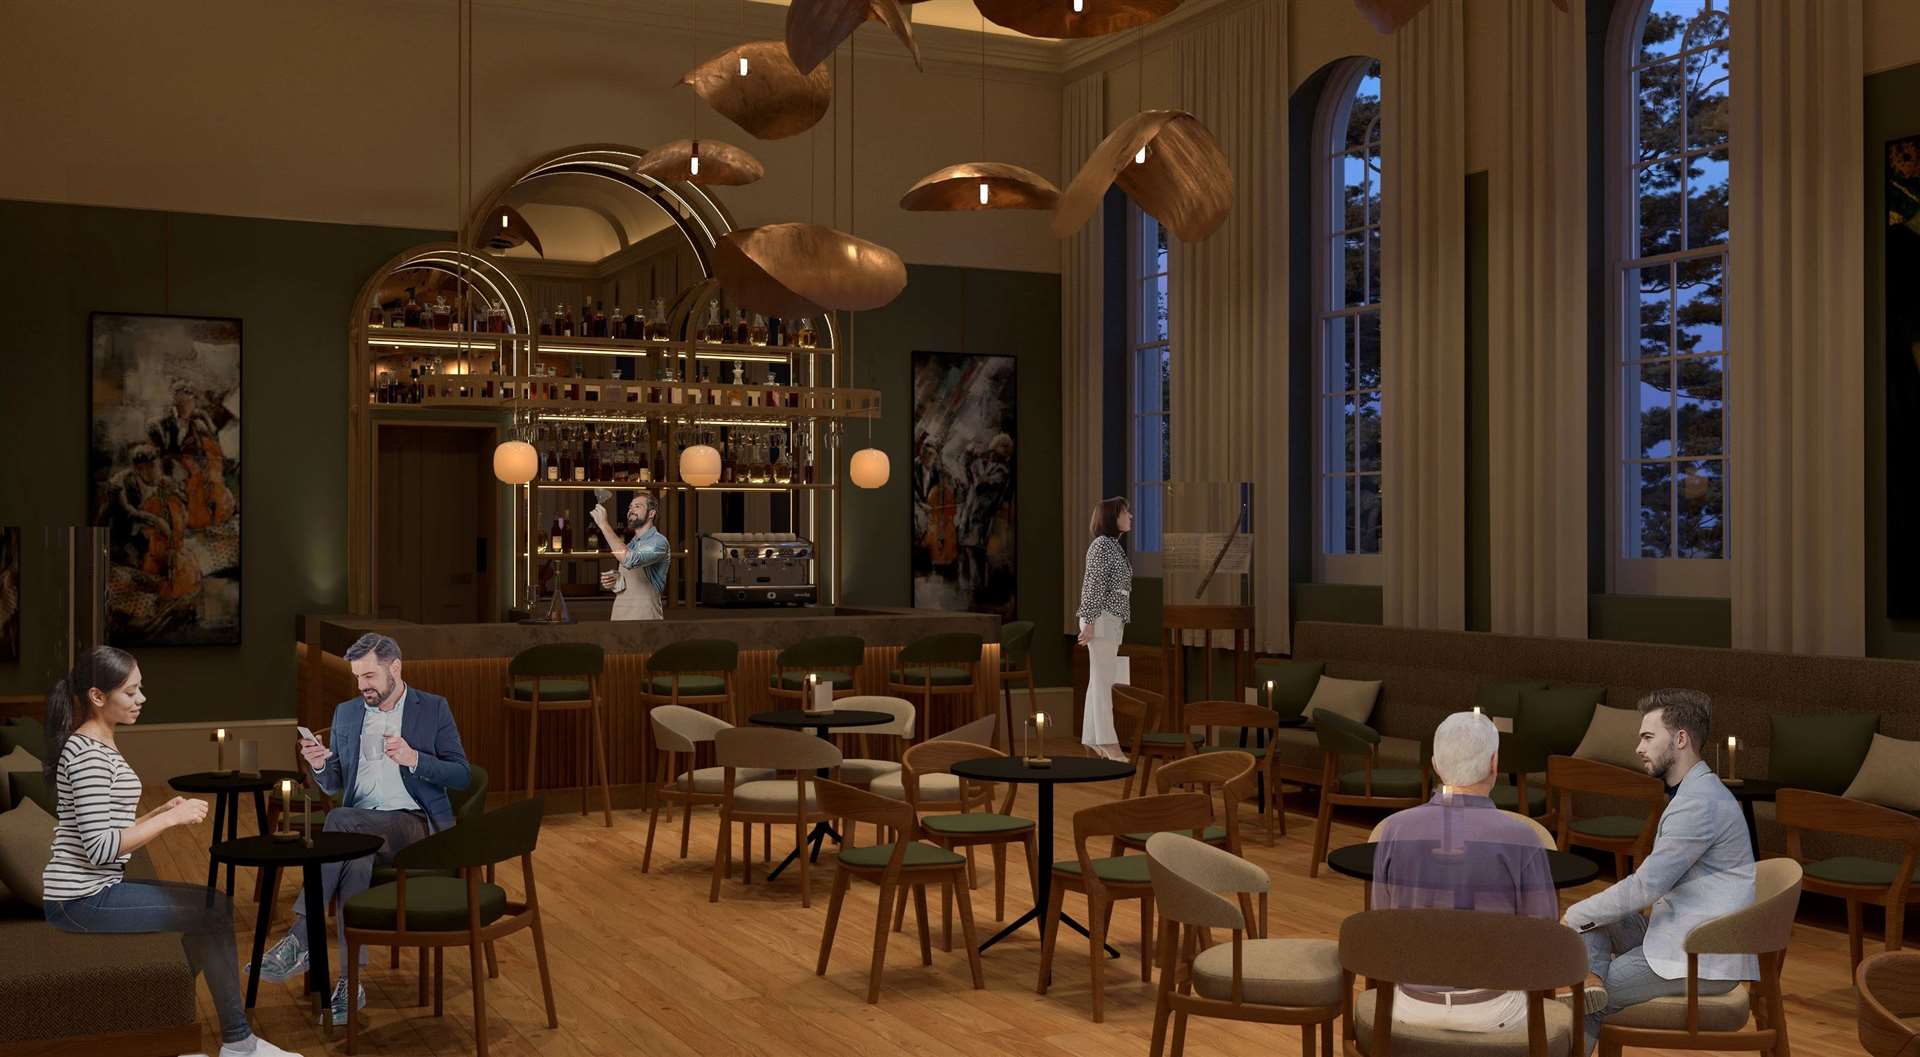 An artist's impression of the Cèilidh Rooms bar at the Inverness Castle Experience.